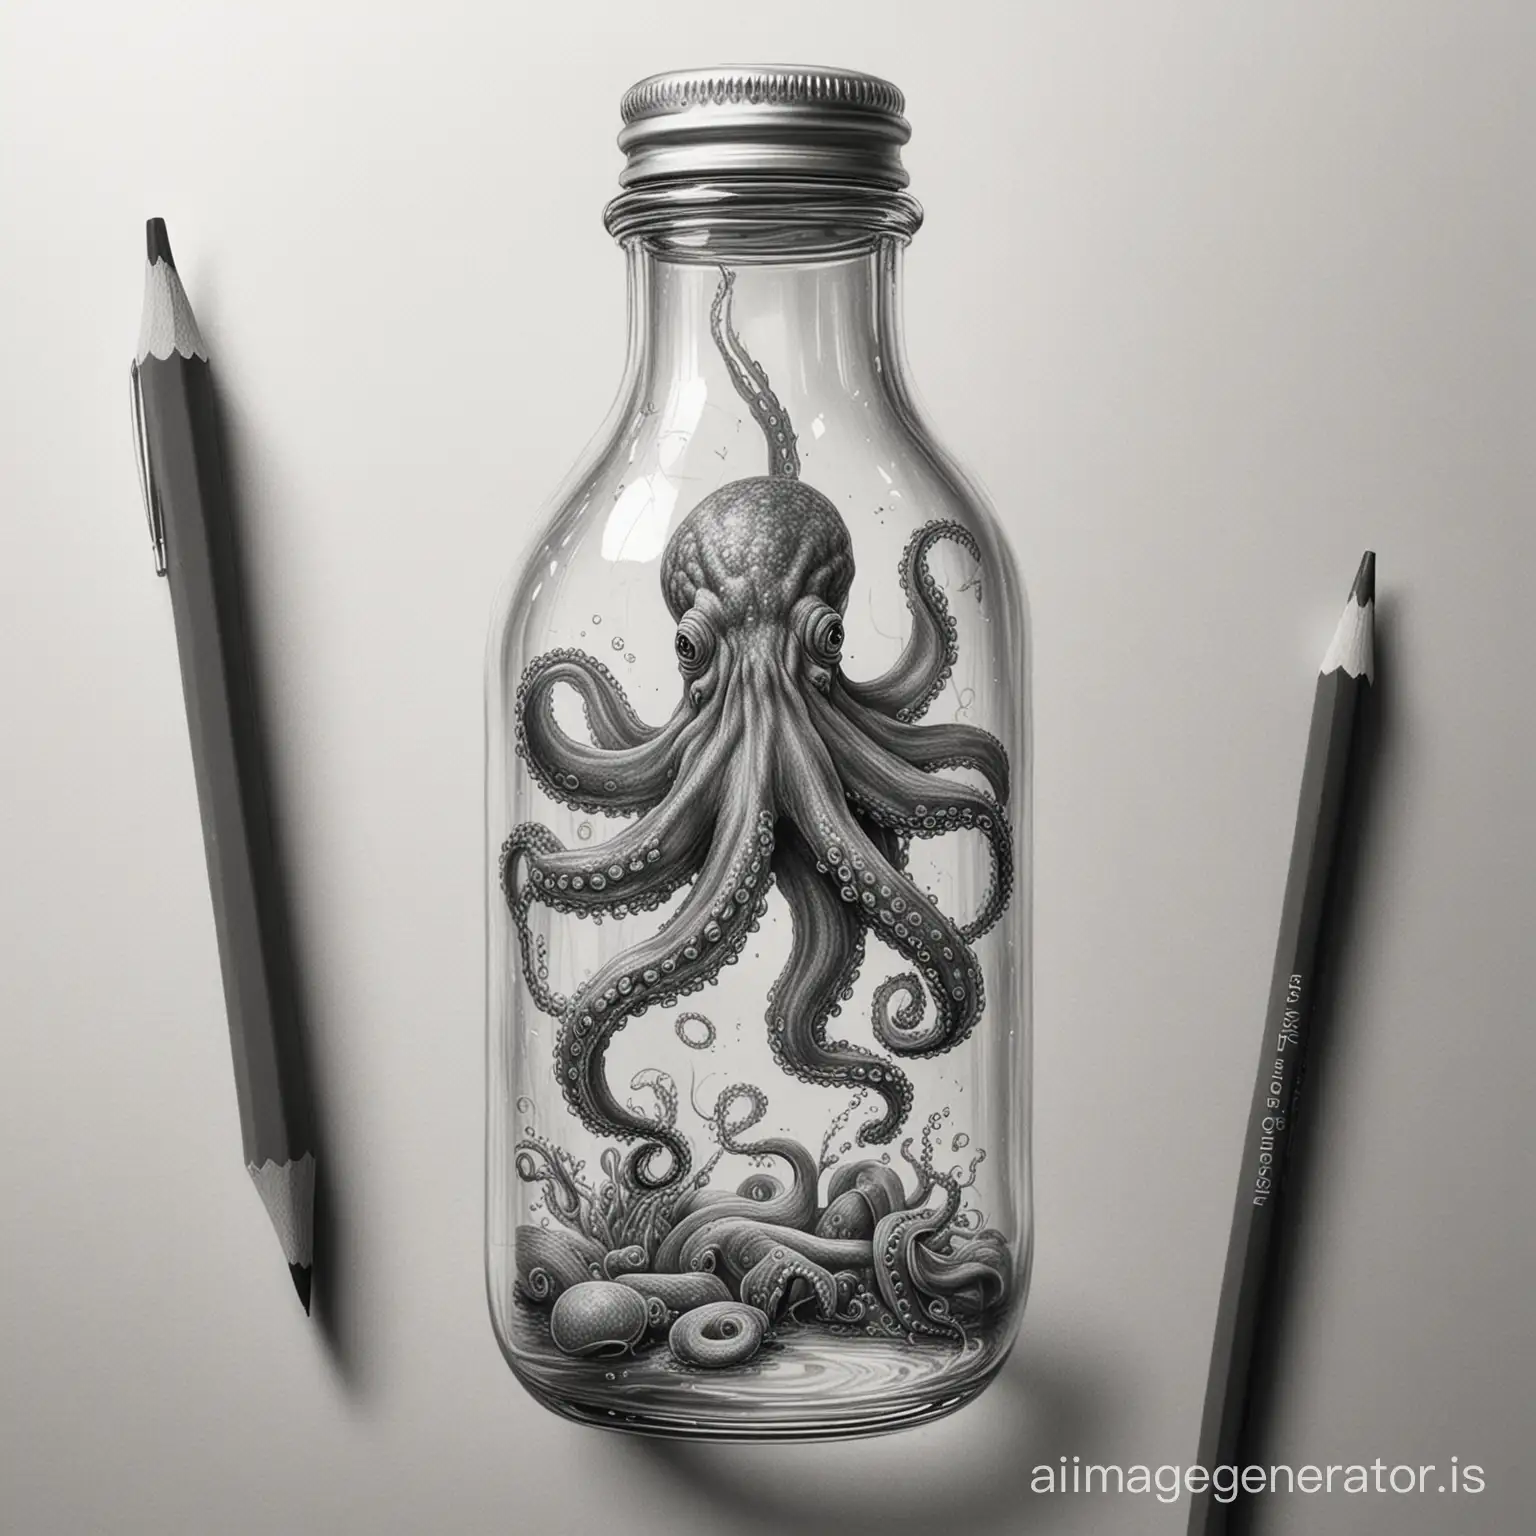 UltraRealistic-Pencil-Sketch-of-Octopus-in-Clear-Bottle